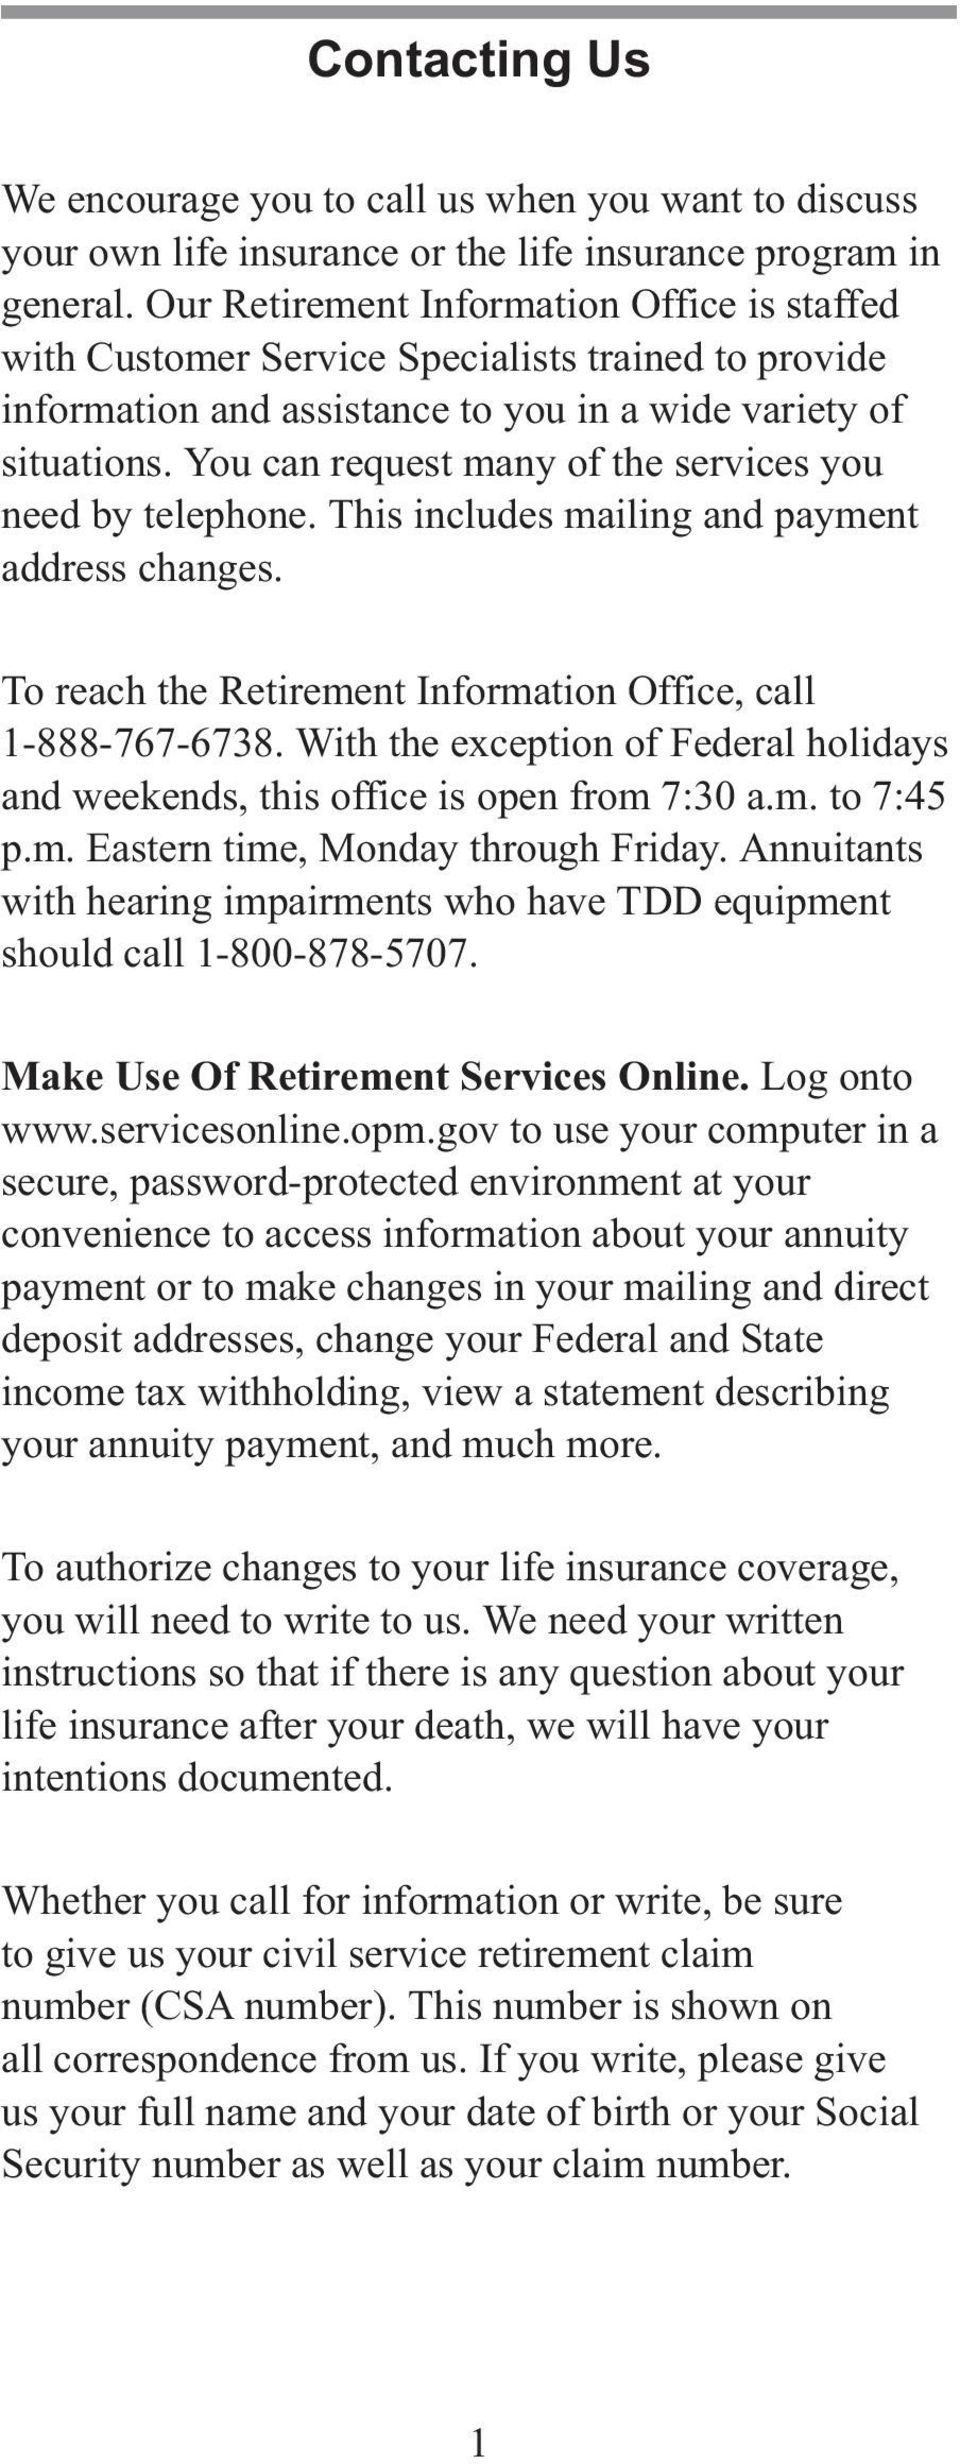 You can request many of the services you need by telephone. This includes mailing and payment address changes. To reach the Retirement Information Office, call 1-888-767-6738.